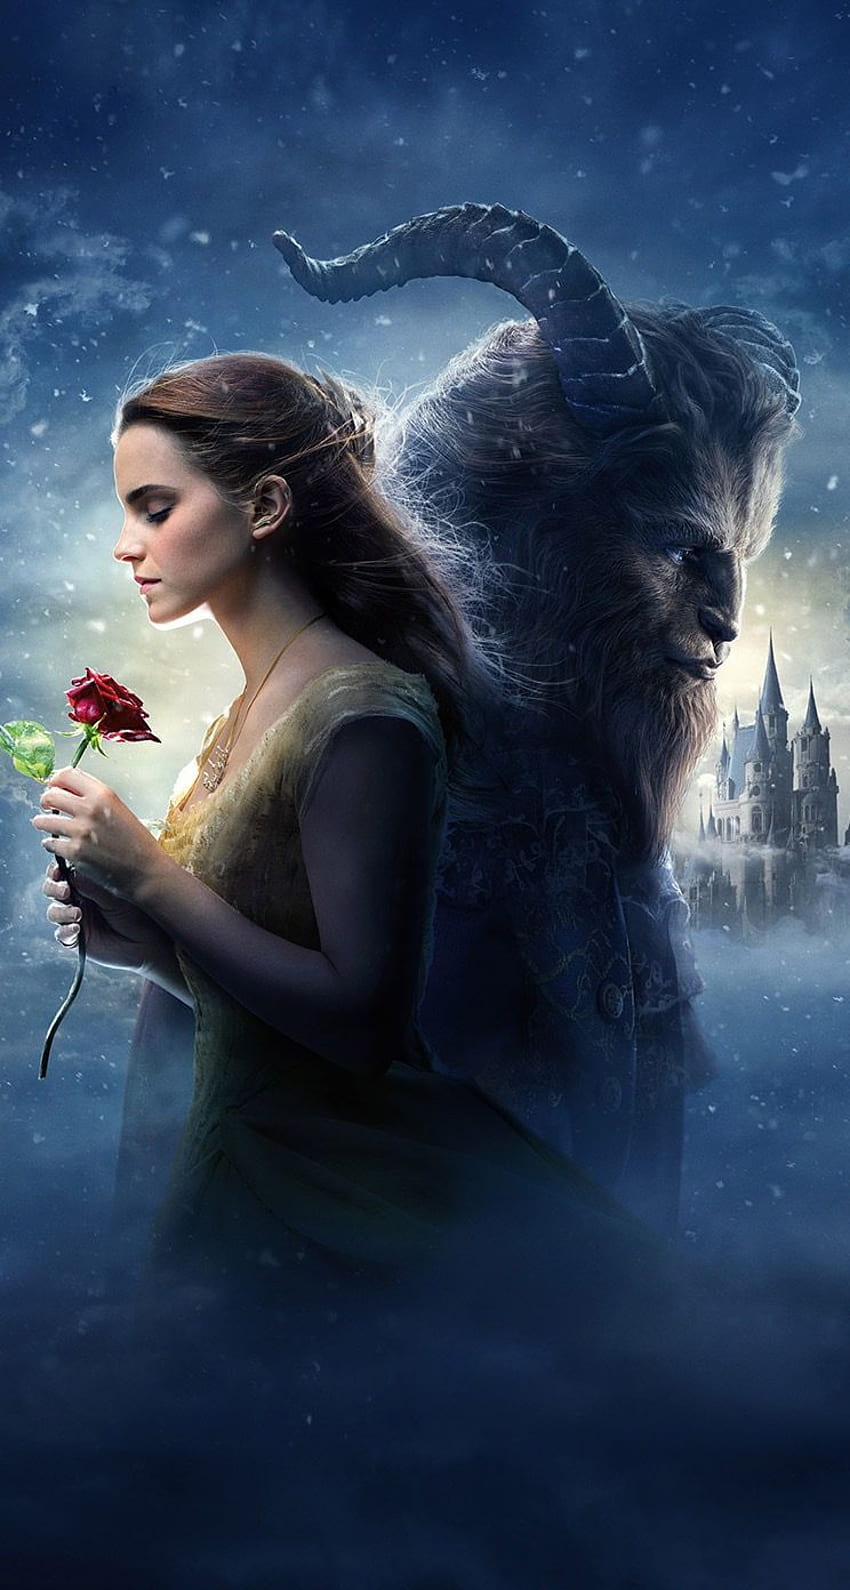 Disney The Beauty And The Beast For iPhone, Belle Emma Watson HD phone wallpaper